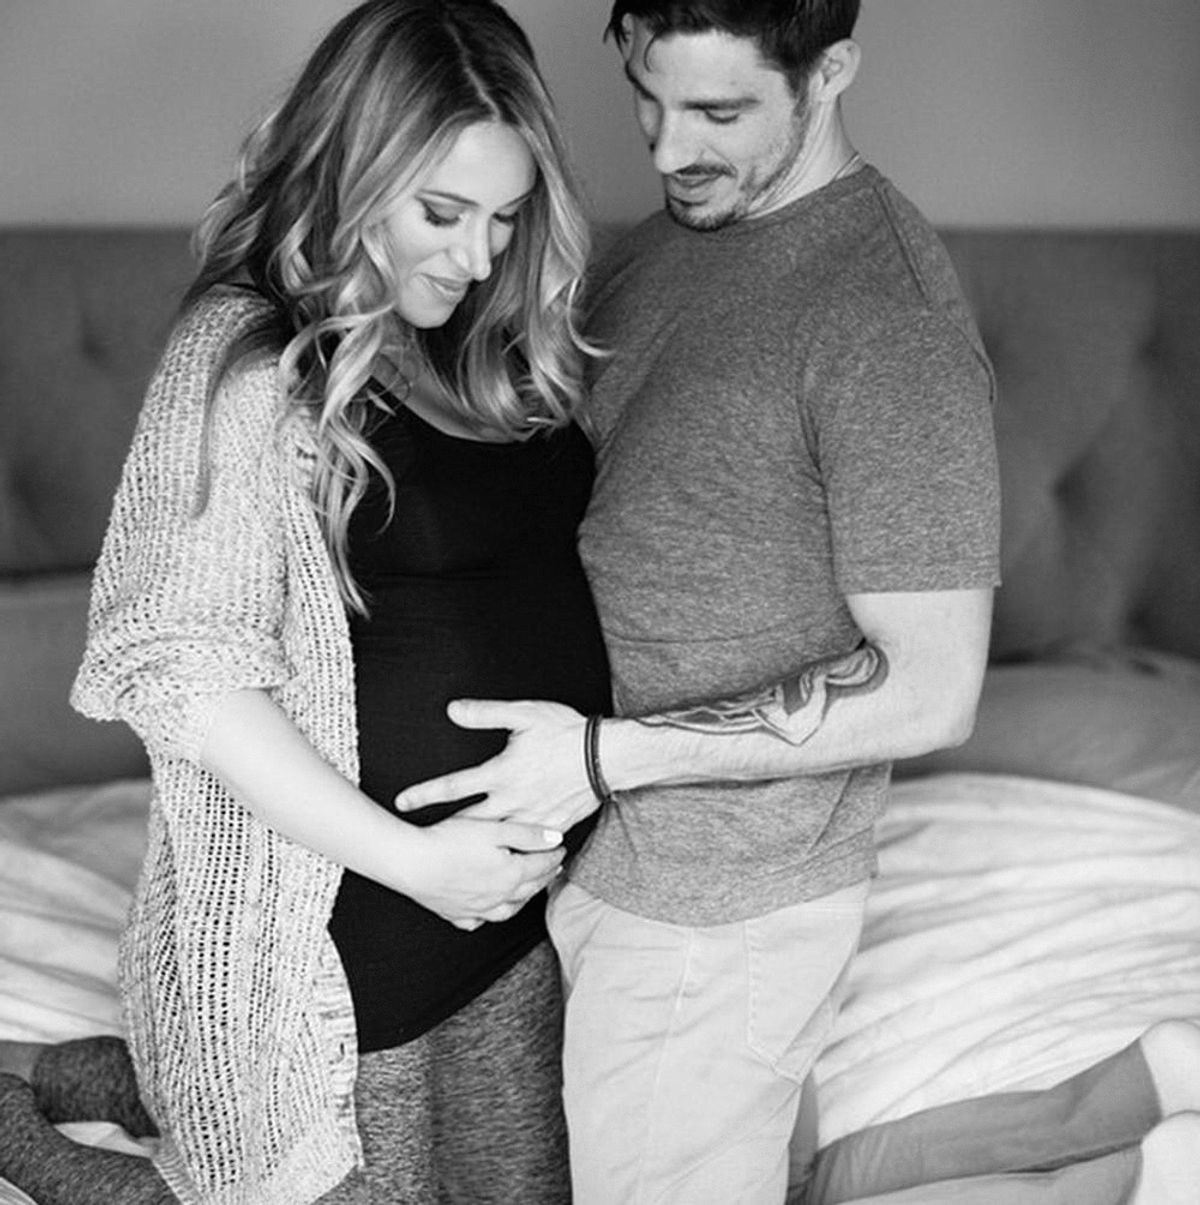 Haylie Duff Joins the Unisex Baby Name Trend With Her New Daughter